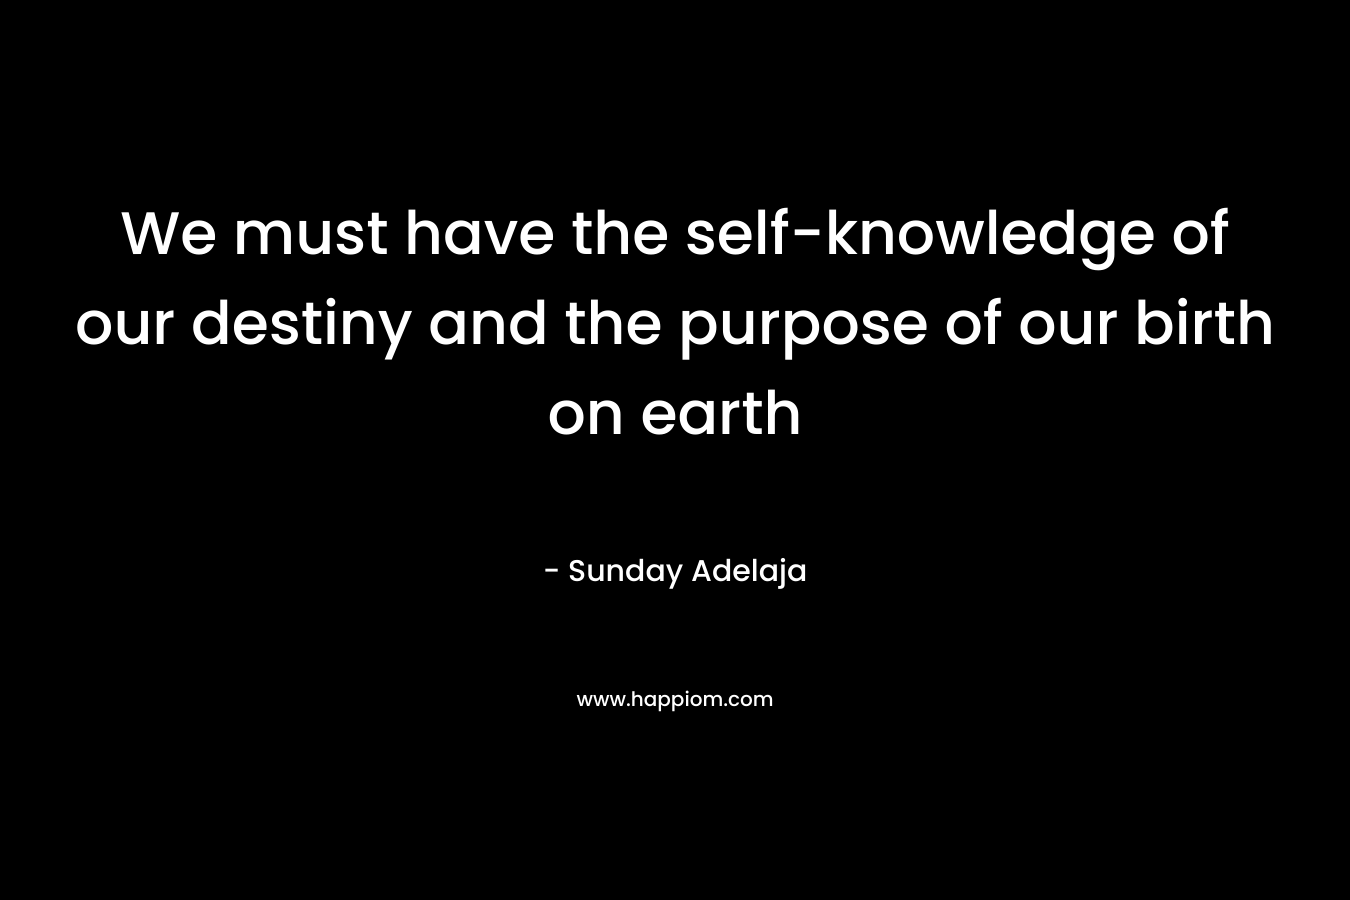 We must have the self-knowledge of our destiny and the purpose of our birth on earth